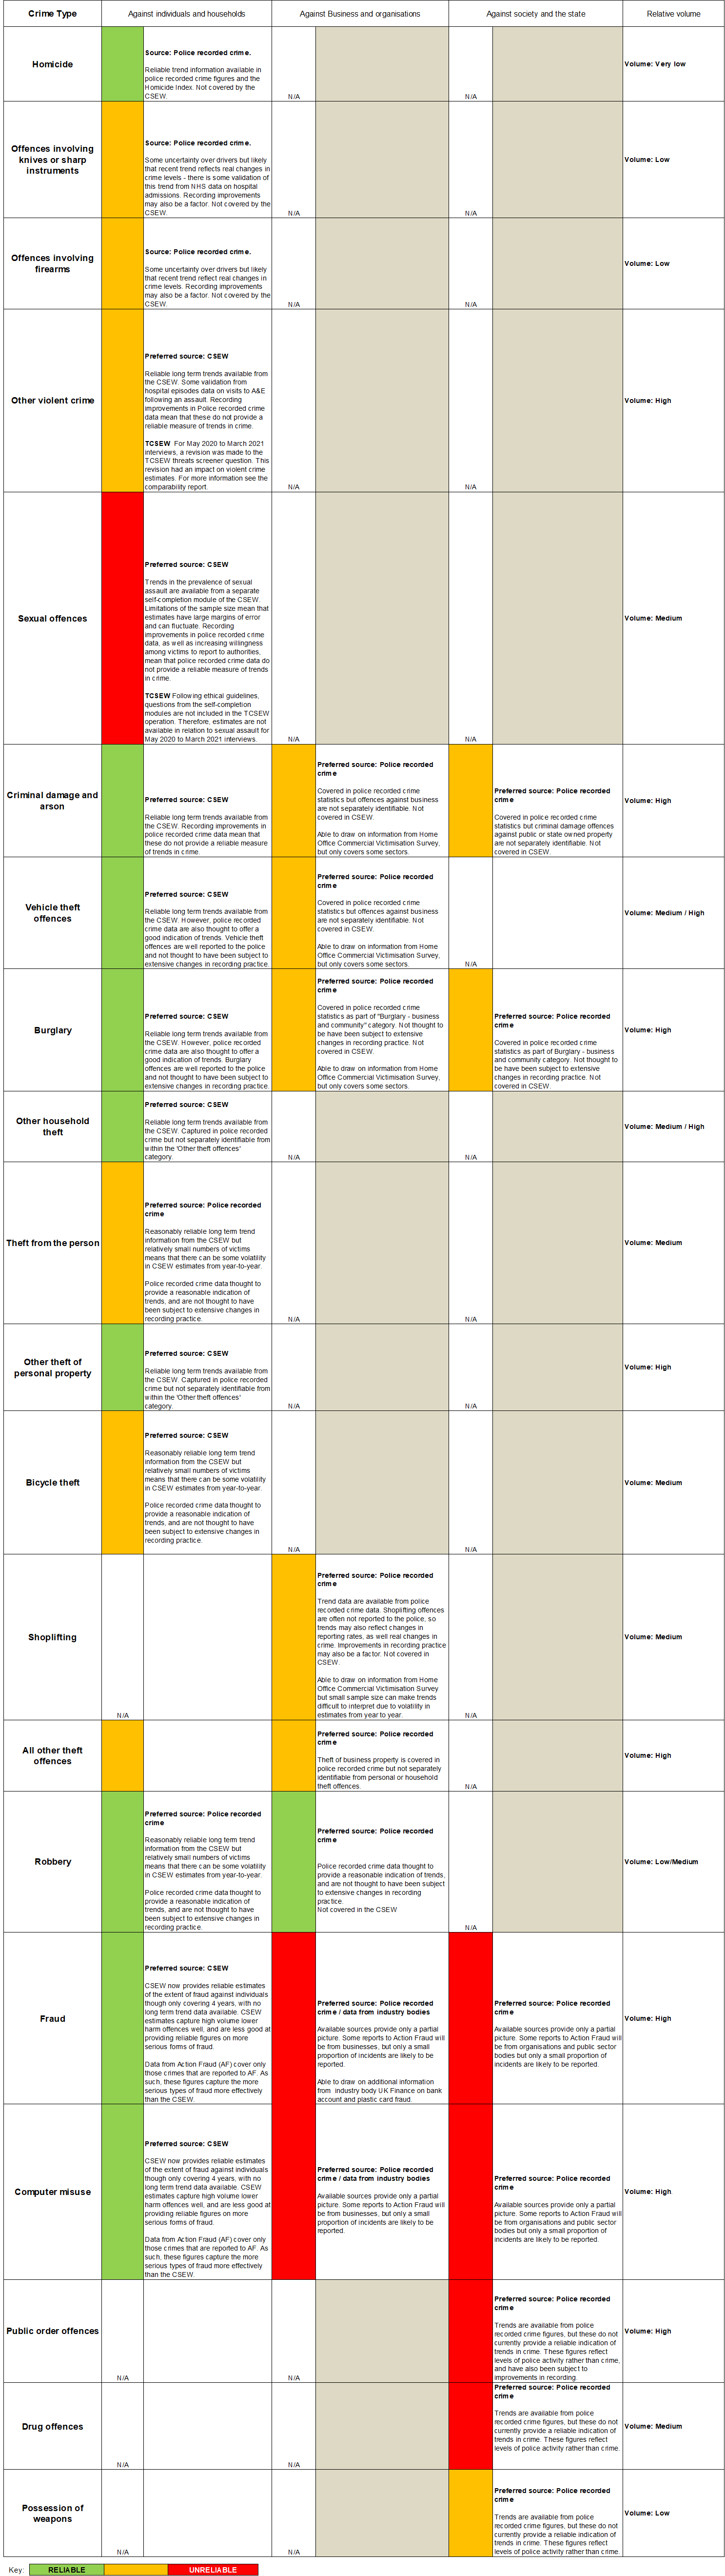 Table showing the CSEW, TCSEW and police recorded crime data quality framework.